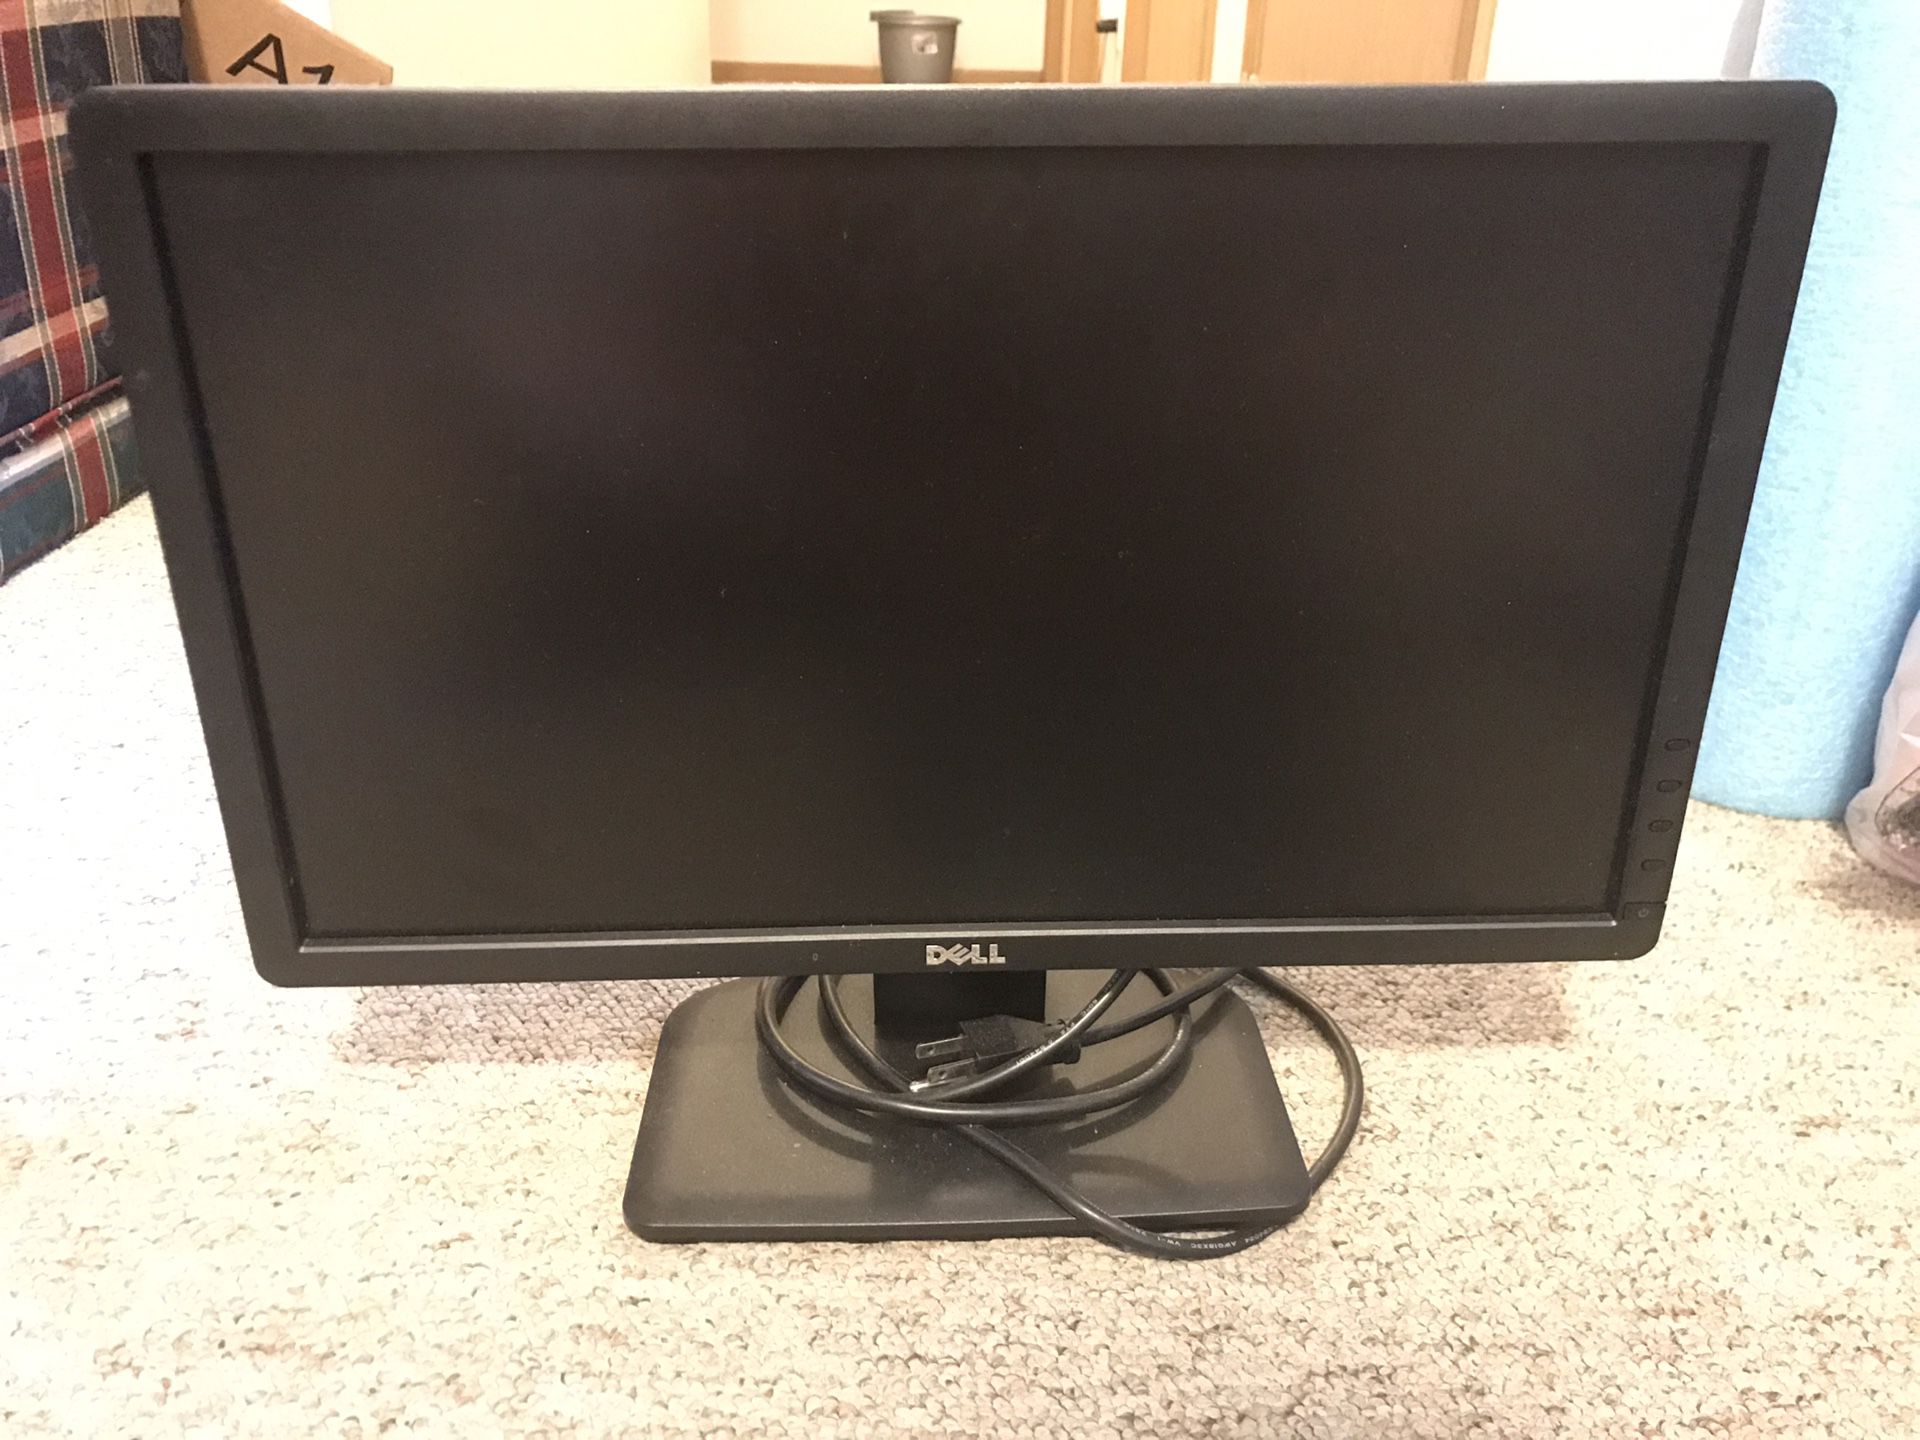 2 monitor for 10